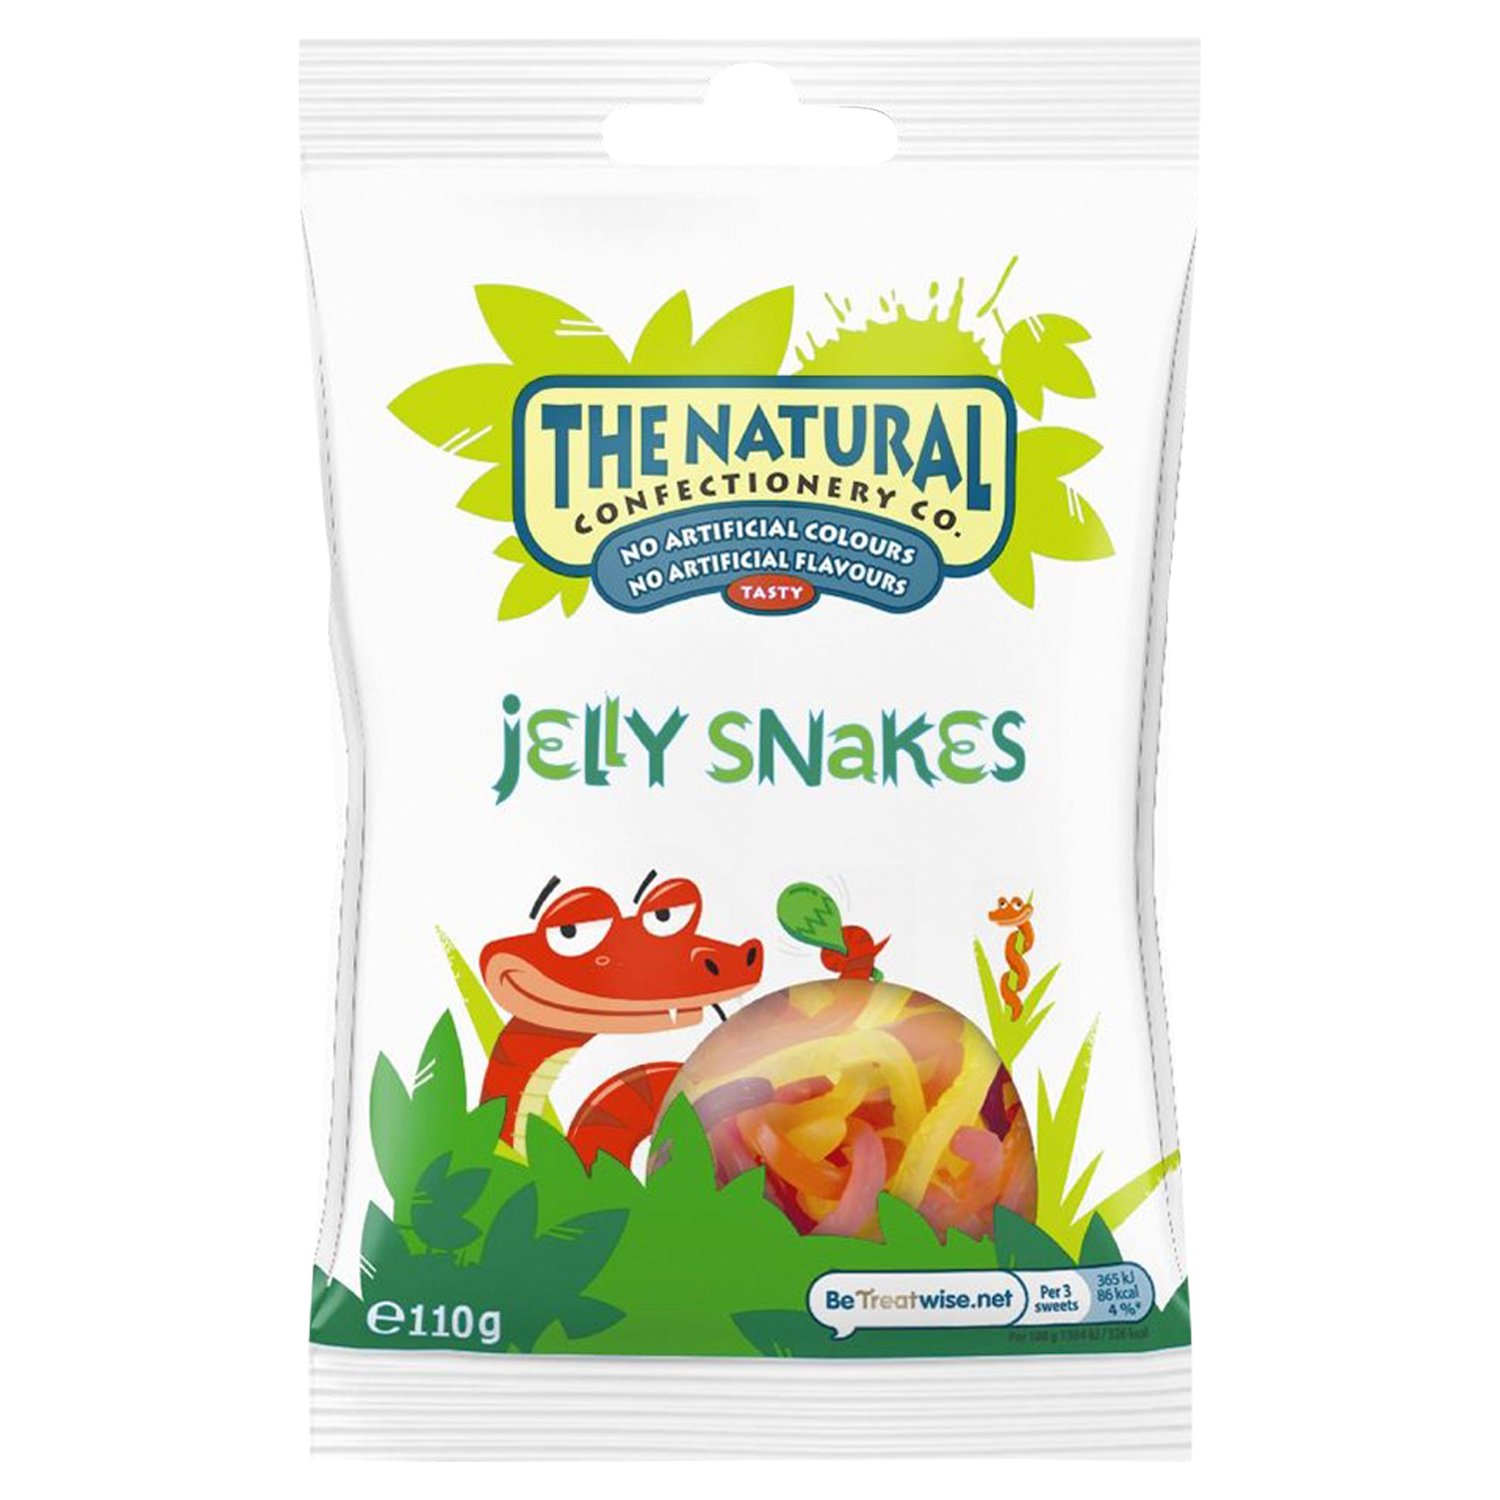 The Natural Confectionery Conpany Jelly Snakes Bag (110 g)